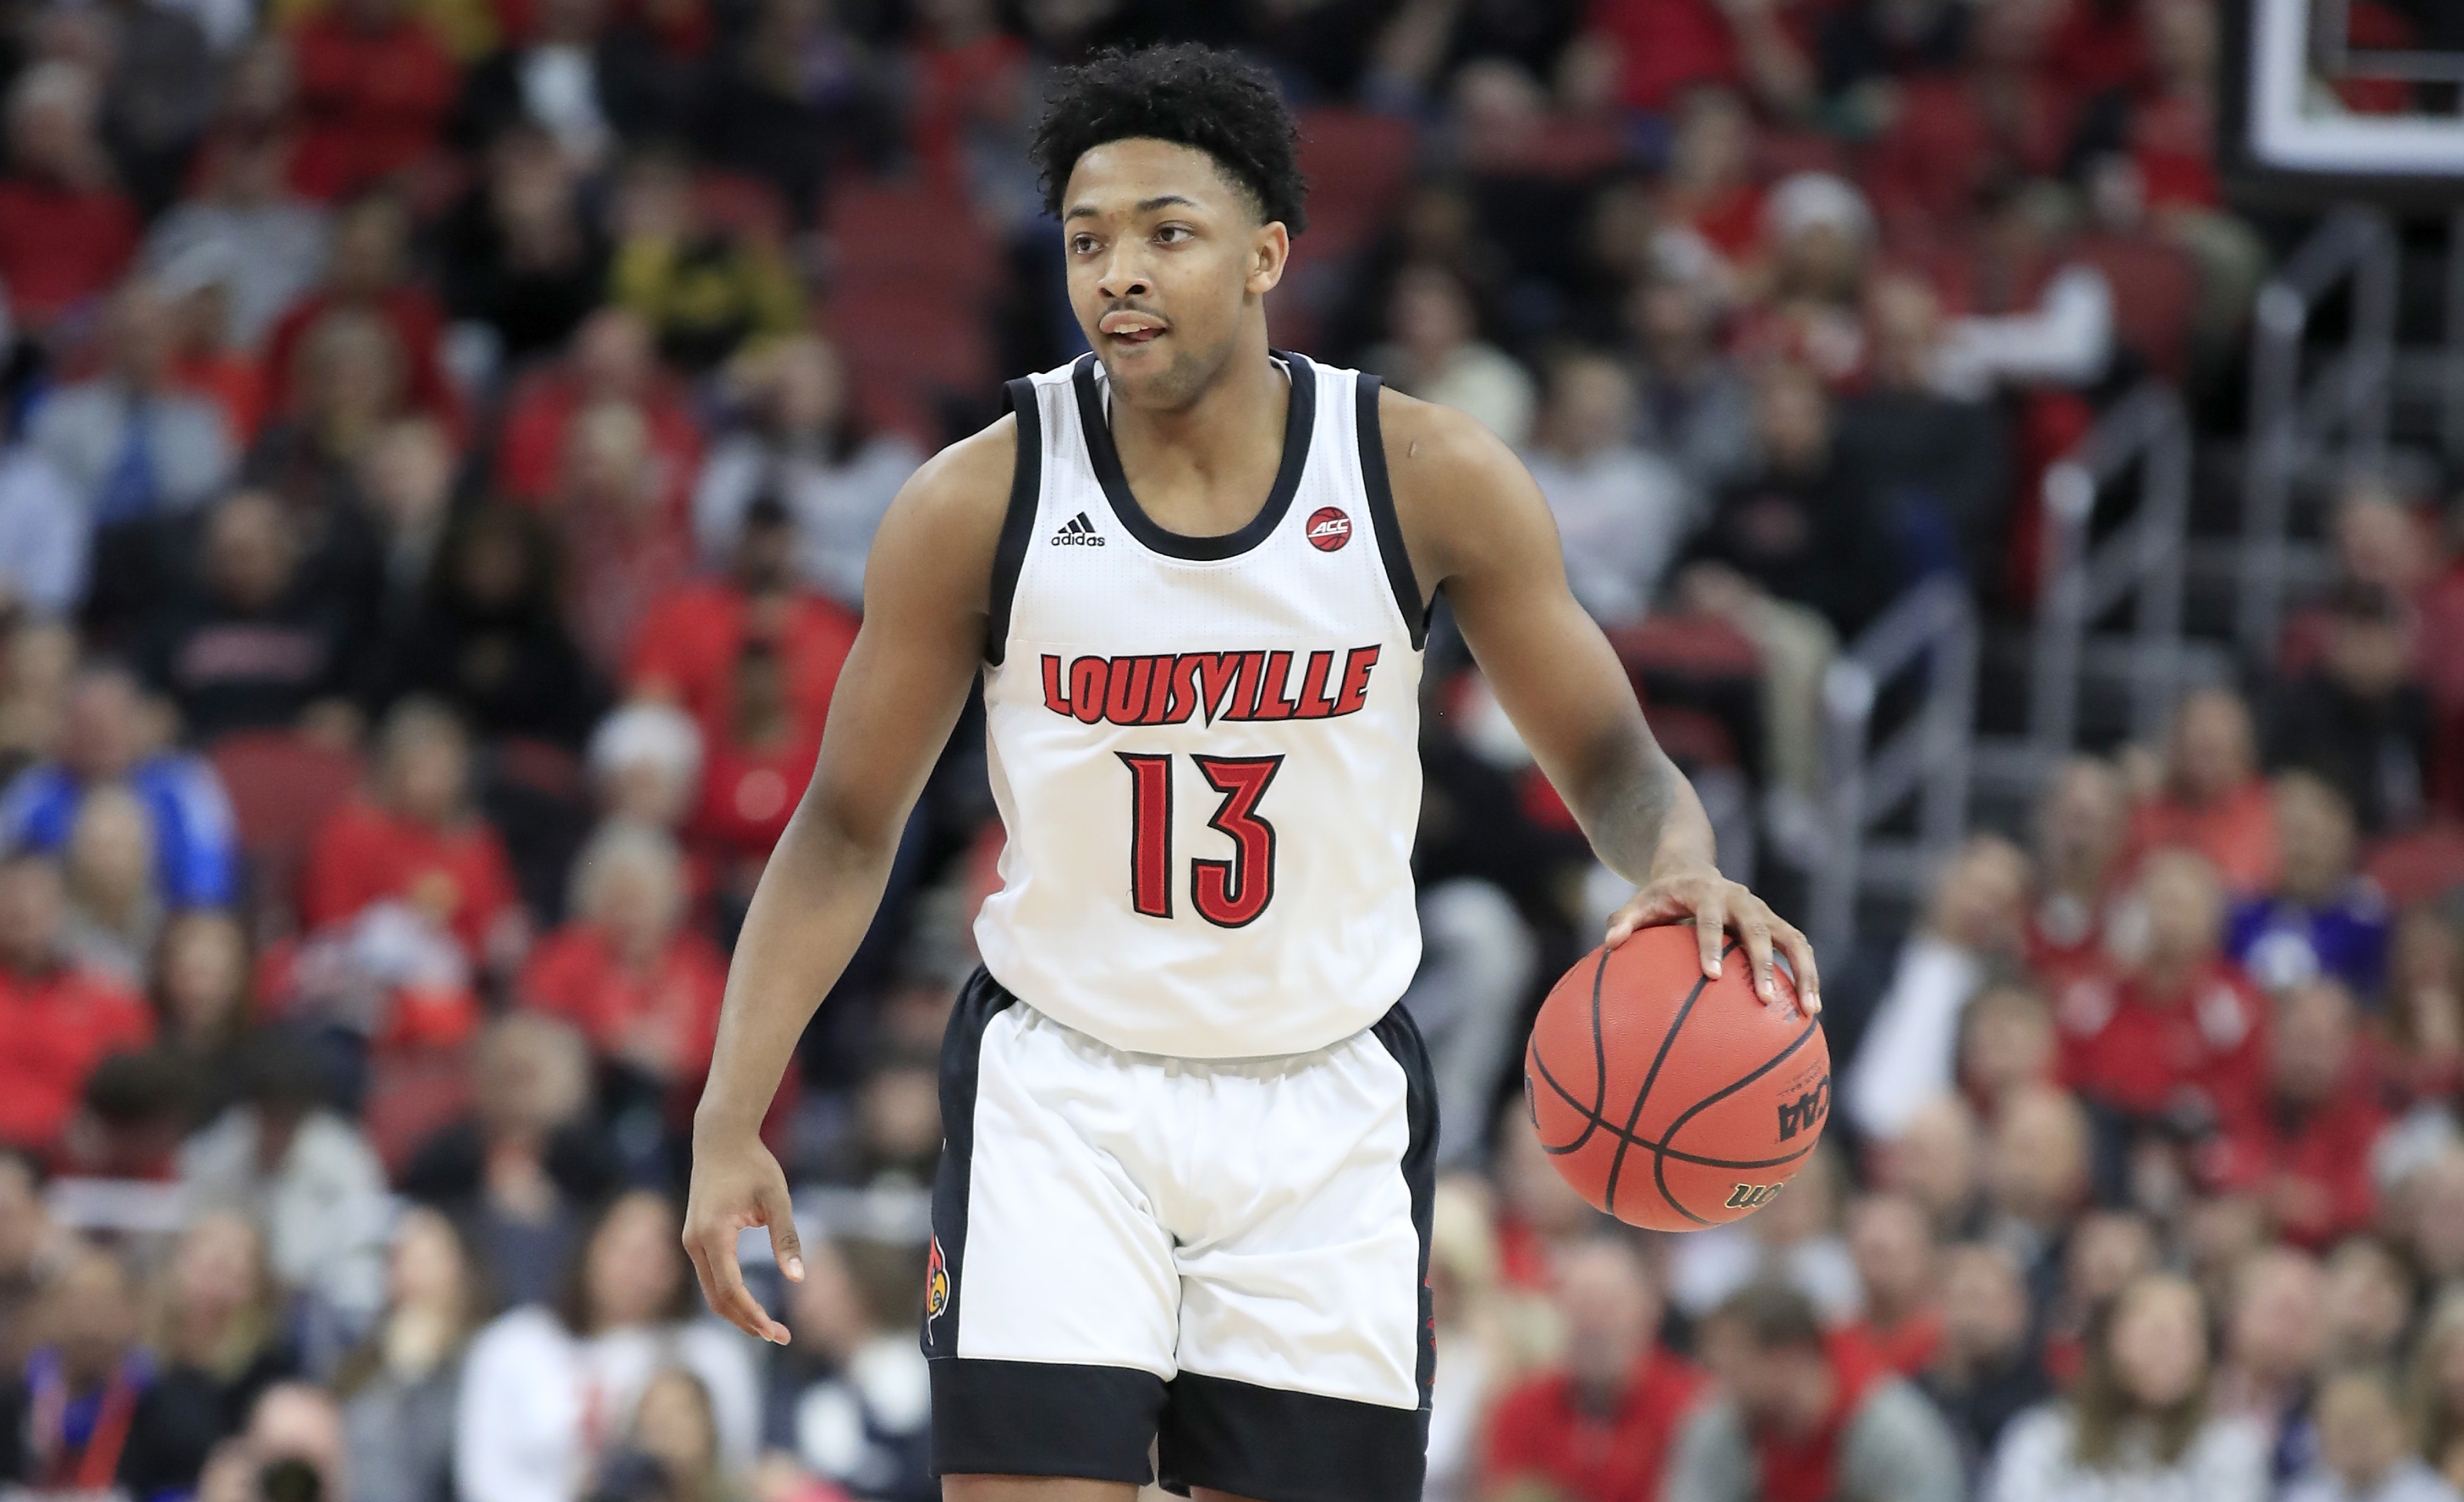 Breaking down three possible starting lineups for the Louisville